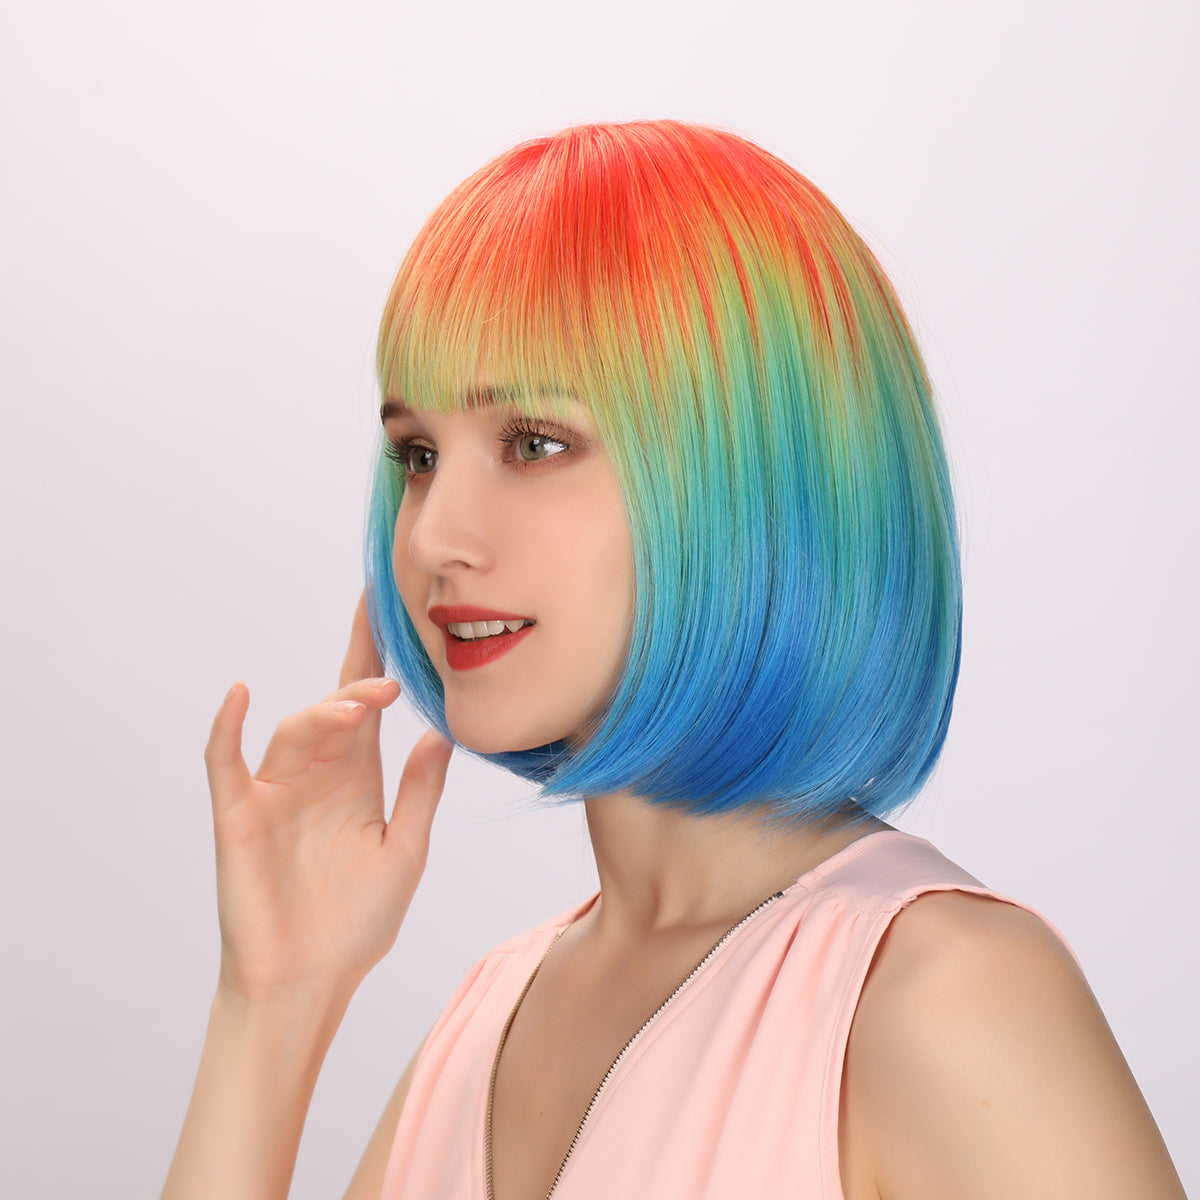 12 Inches | Colorful | Costume | Sraight Hair